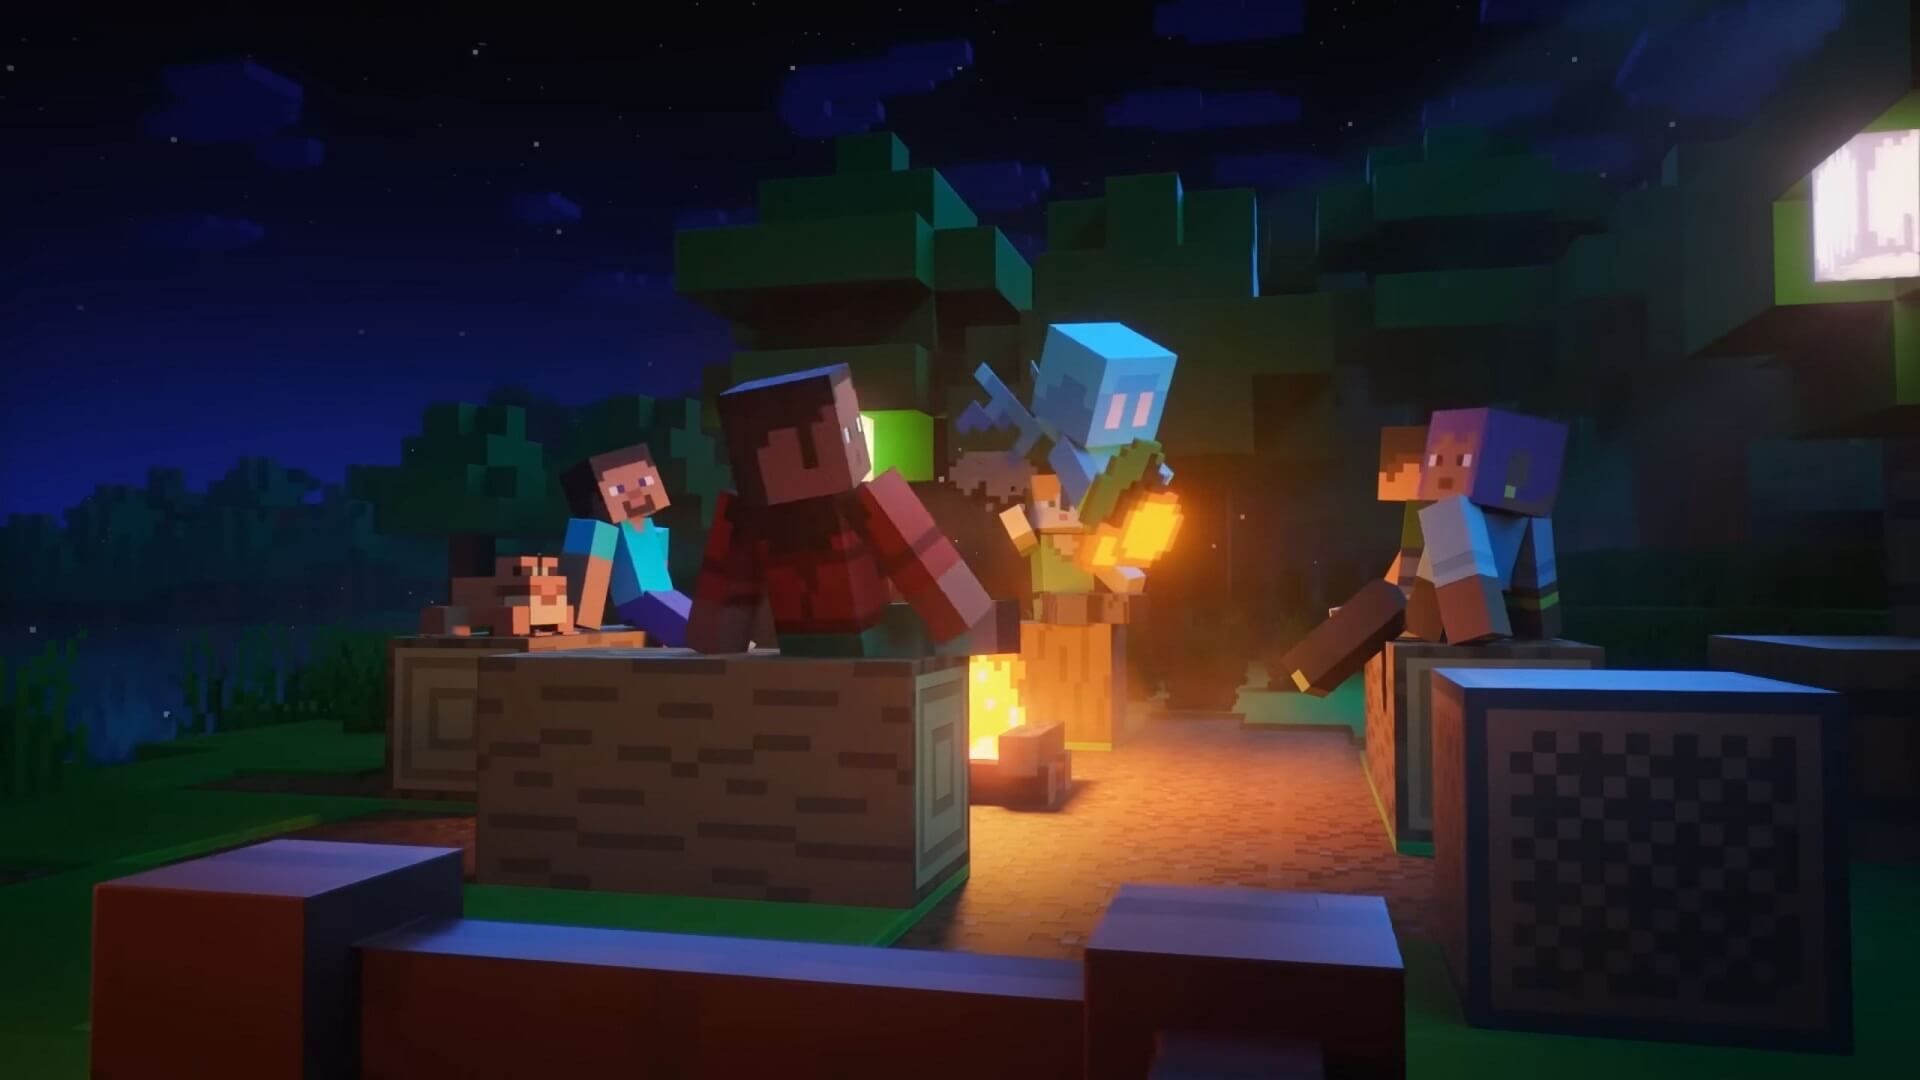 A group of Minecraft characters enjoying a sojourn in the new Minecraft Wild Update